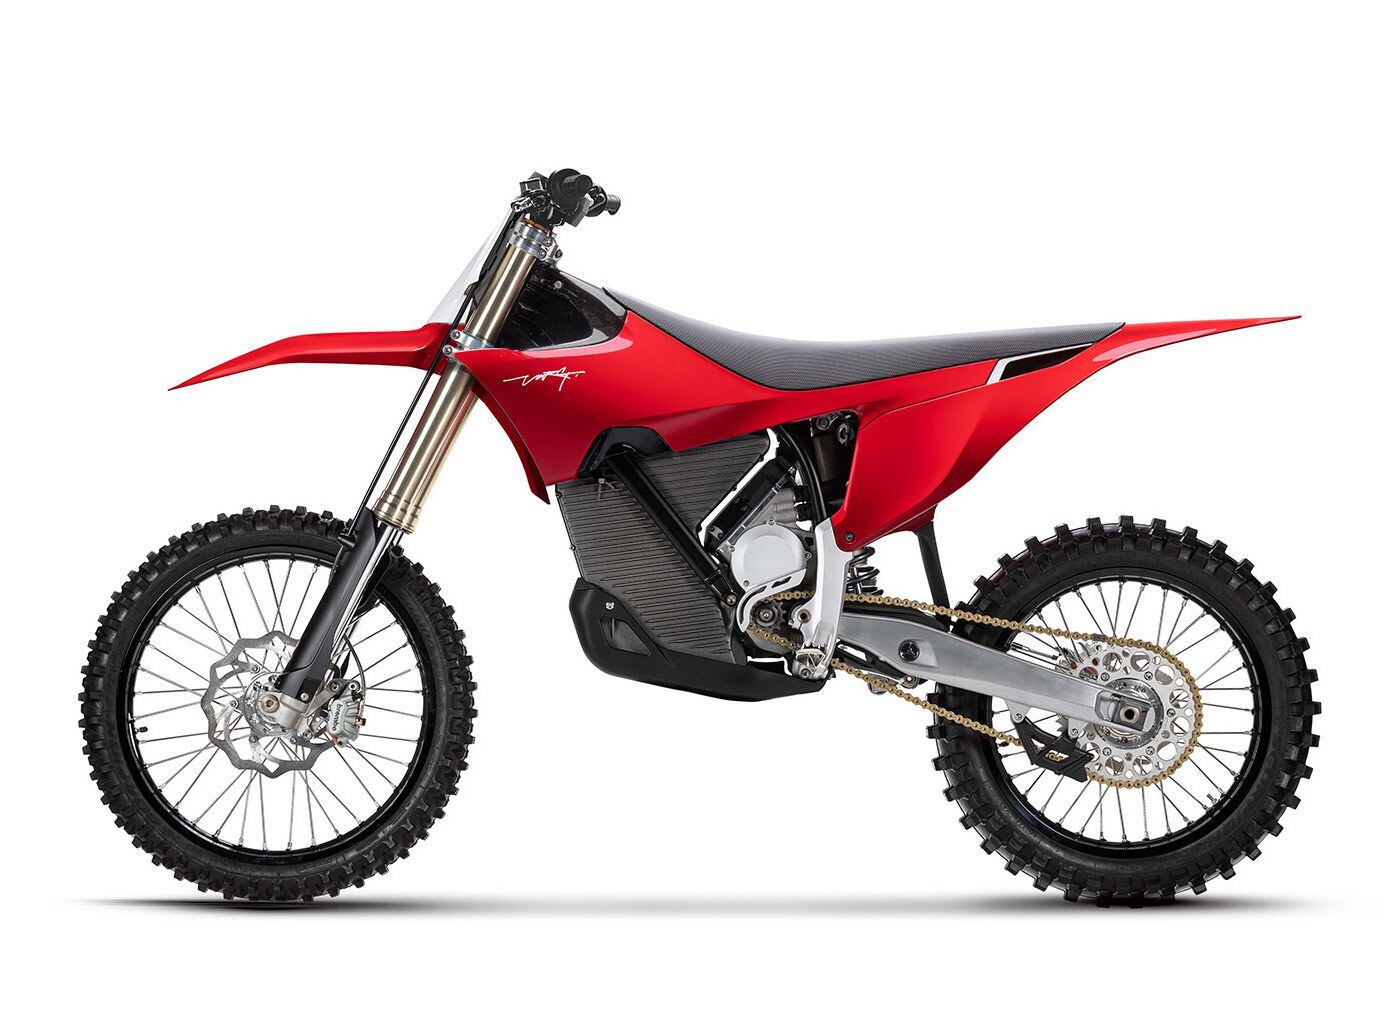 The Most Expensive Motocross Bikes To Buy in 2023